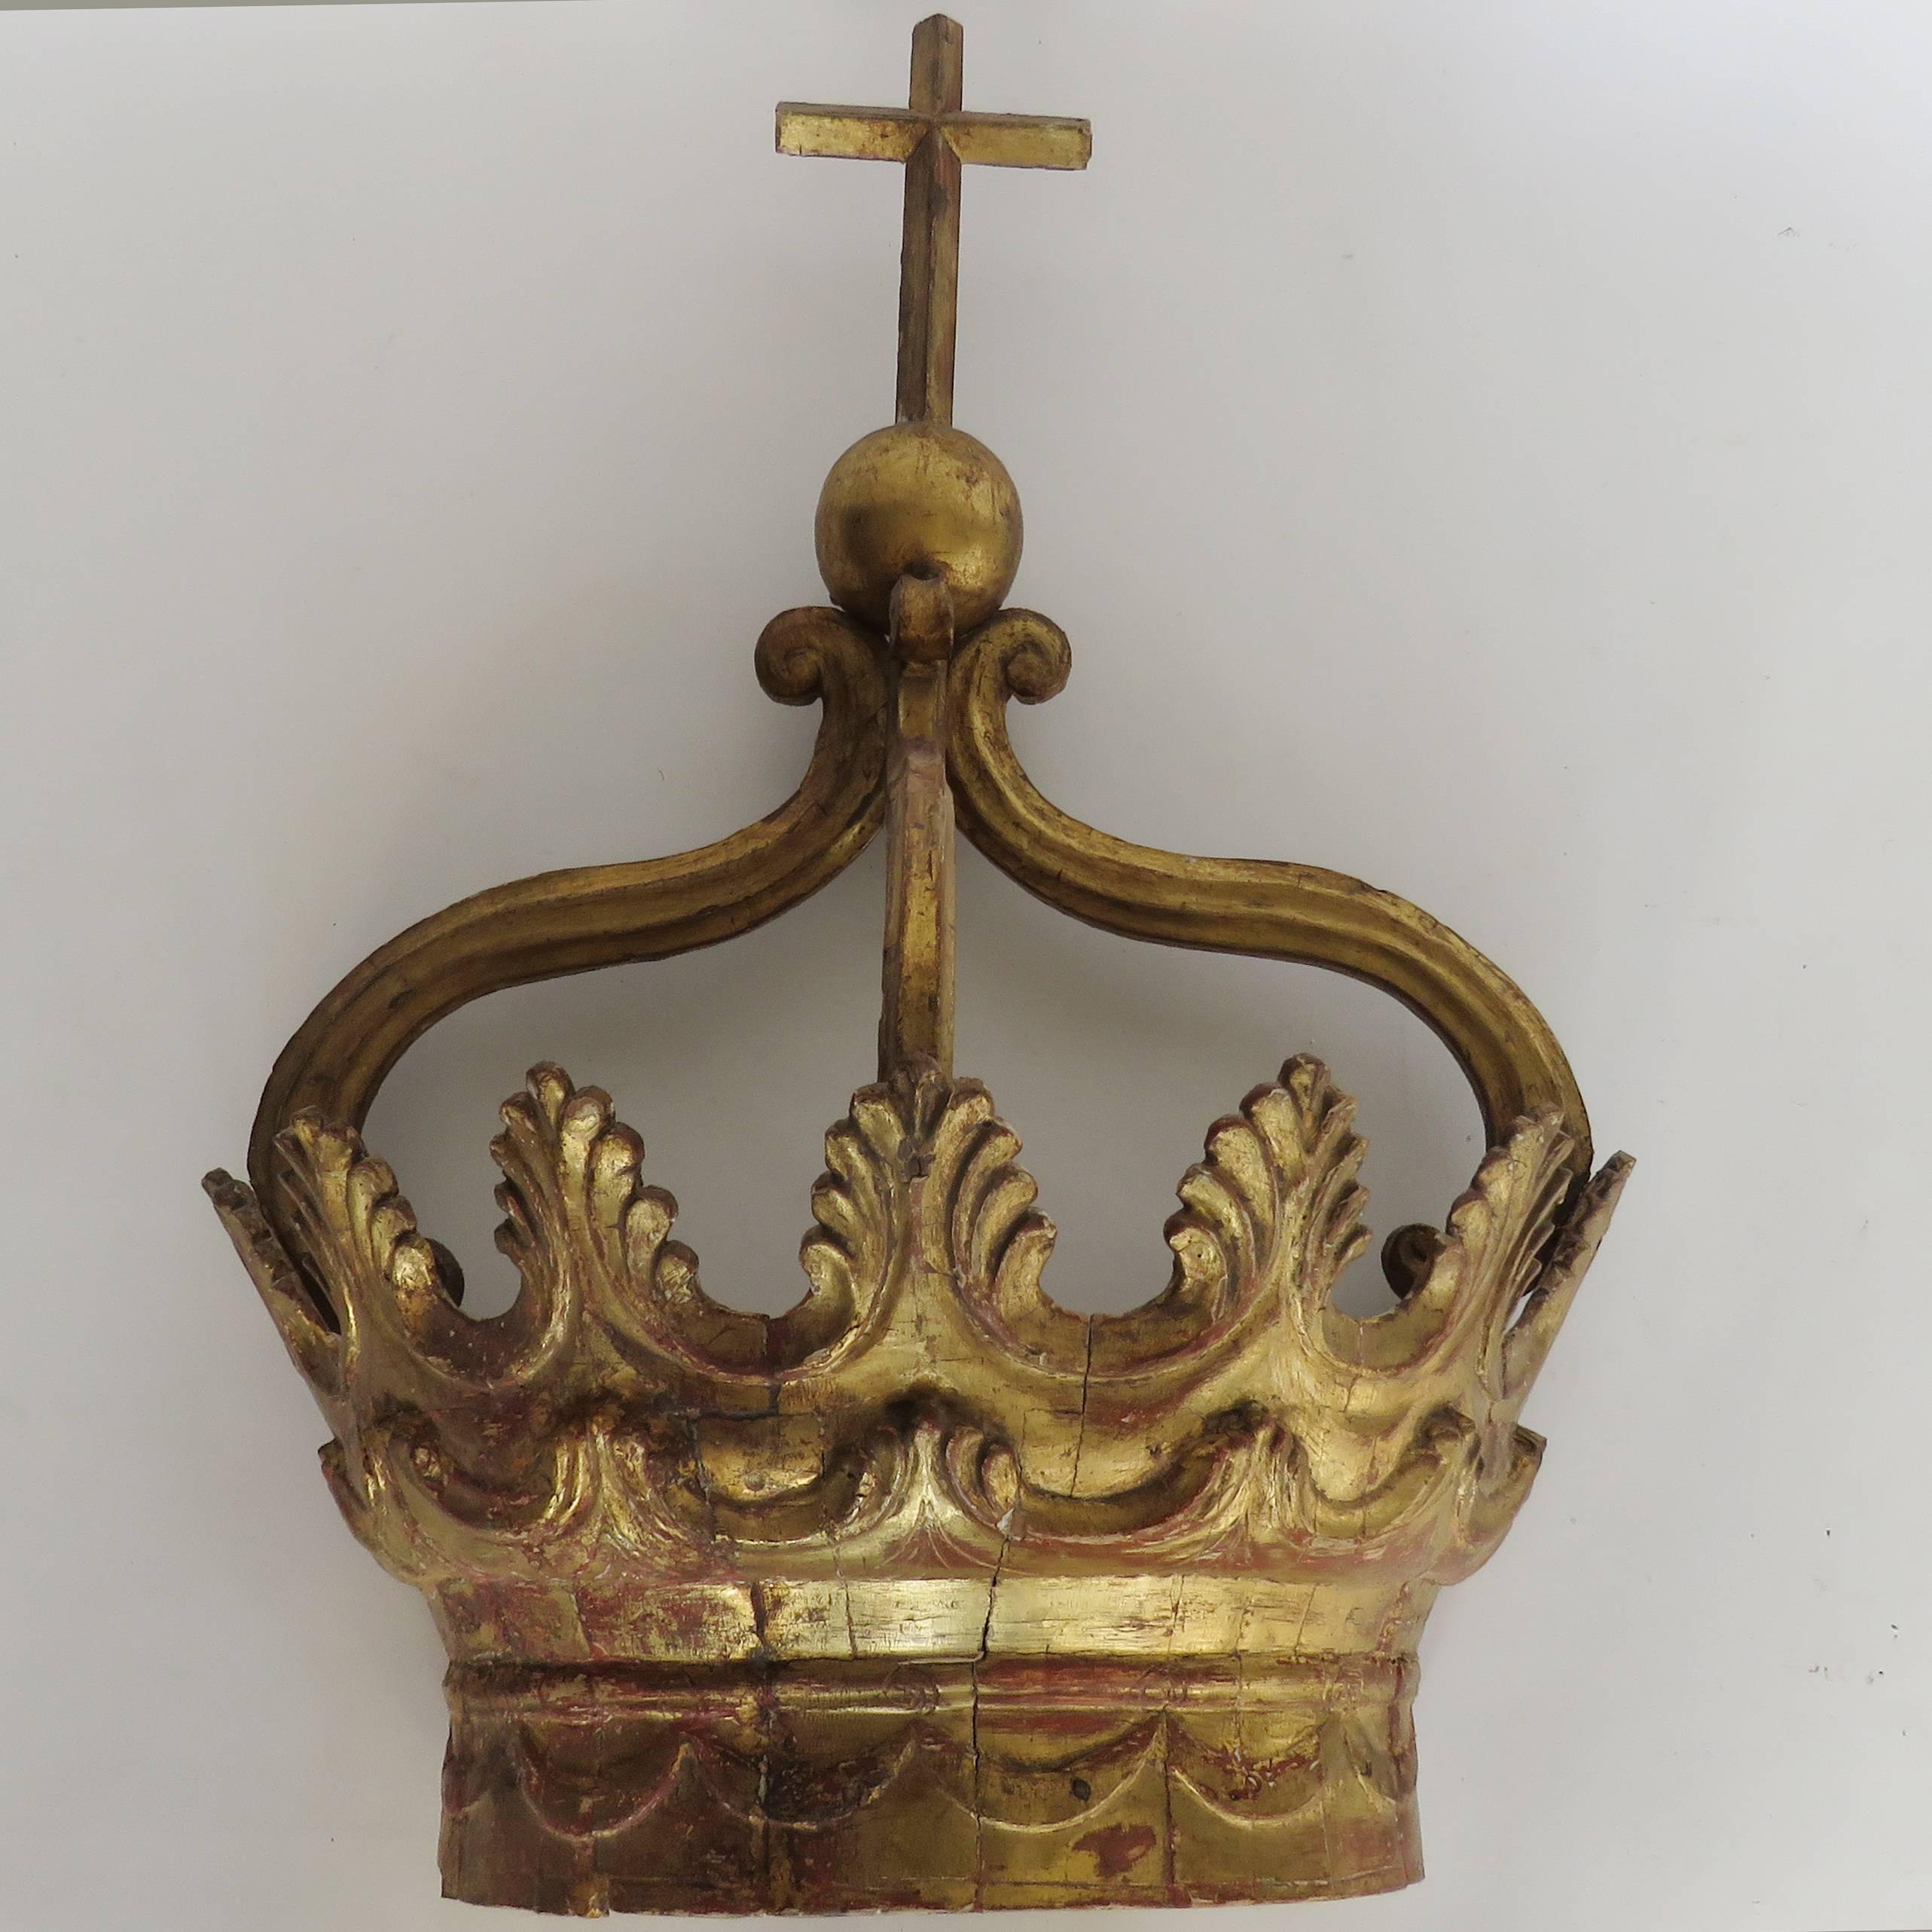 Large giltwood crown, swag decoration on lower band topped by two layers of upright acanthus leaves surmounted by three arms supporting a ball and cross.